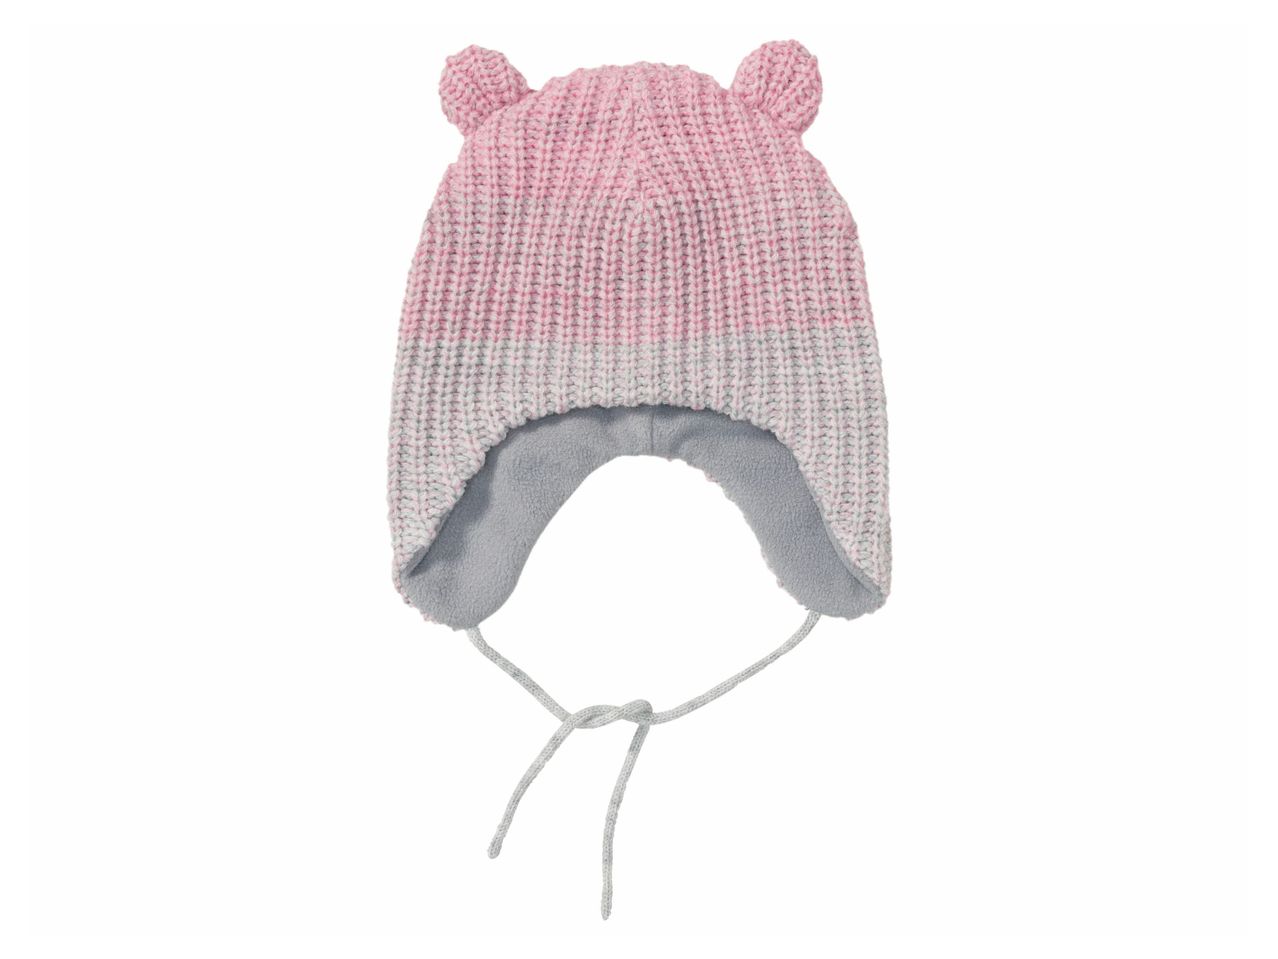 Go to full screen view: Kids' Knitted Hat - Image 1